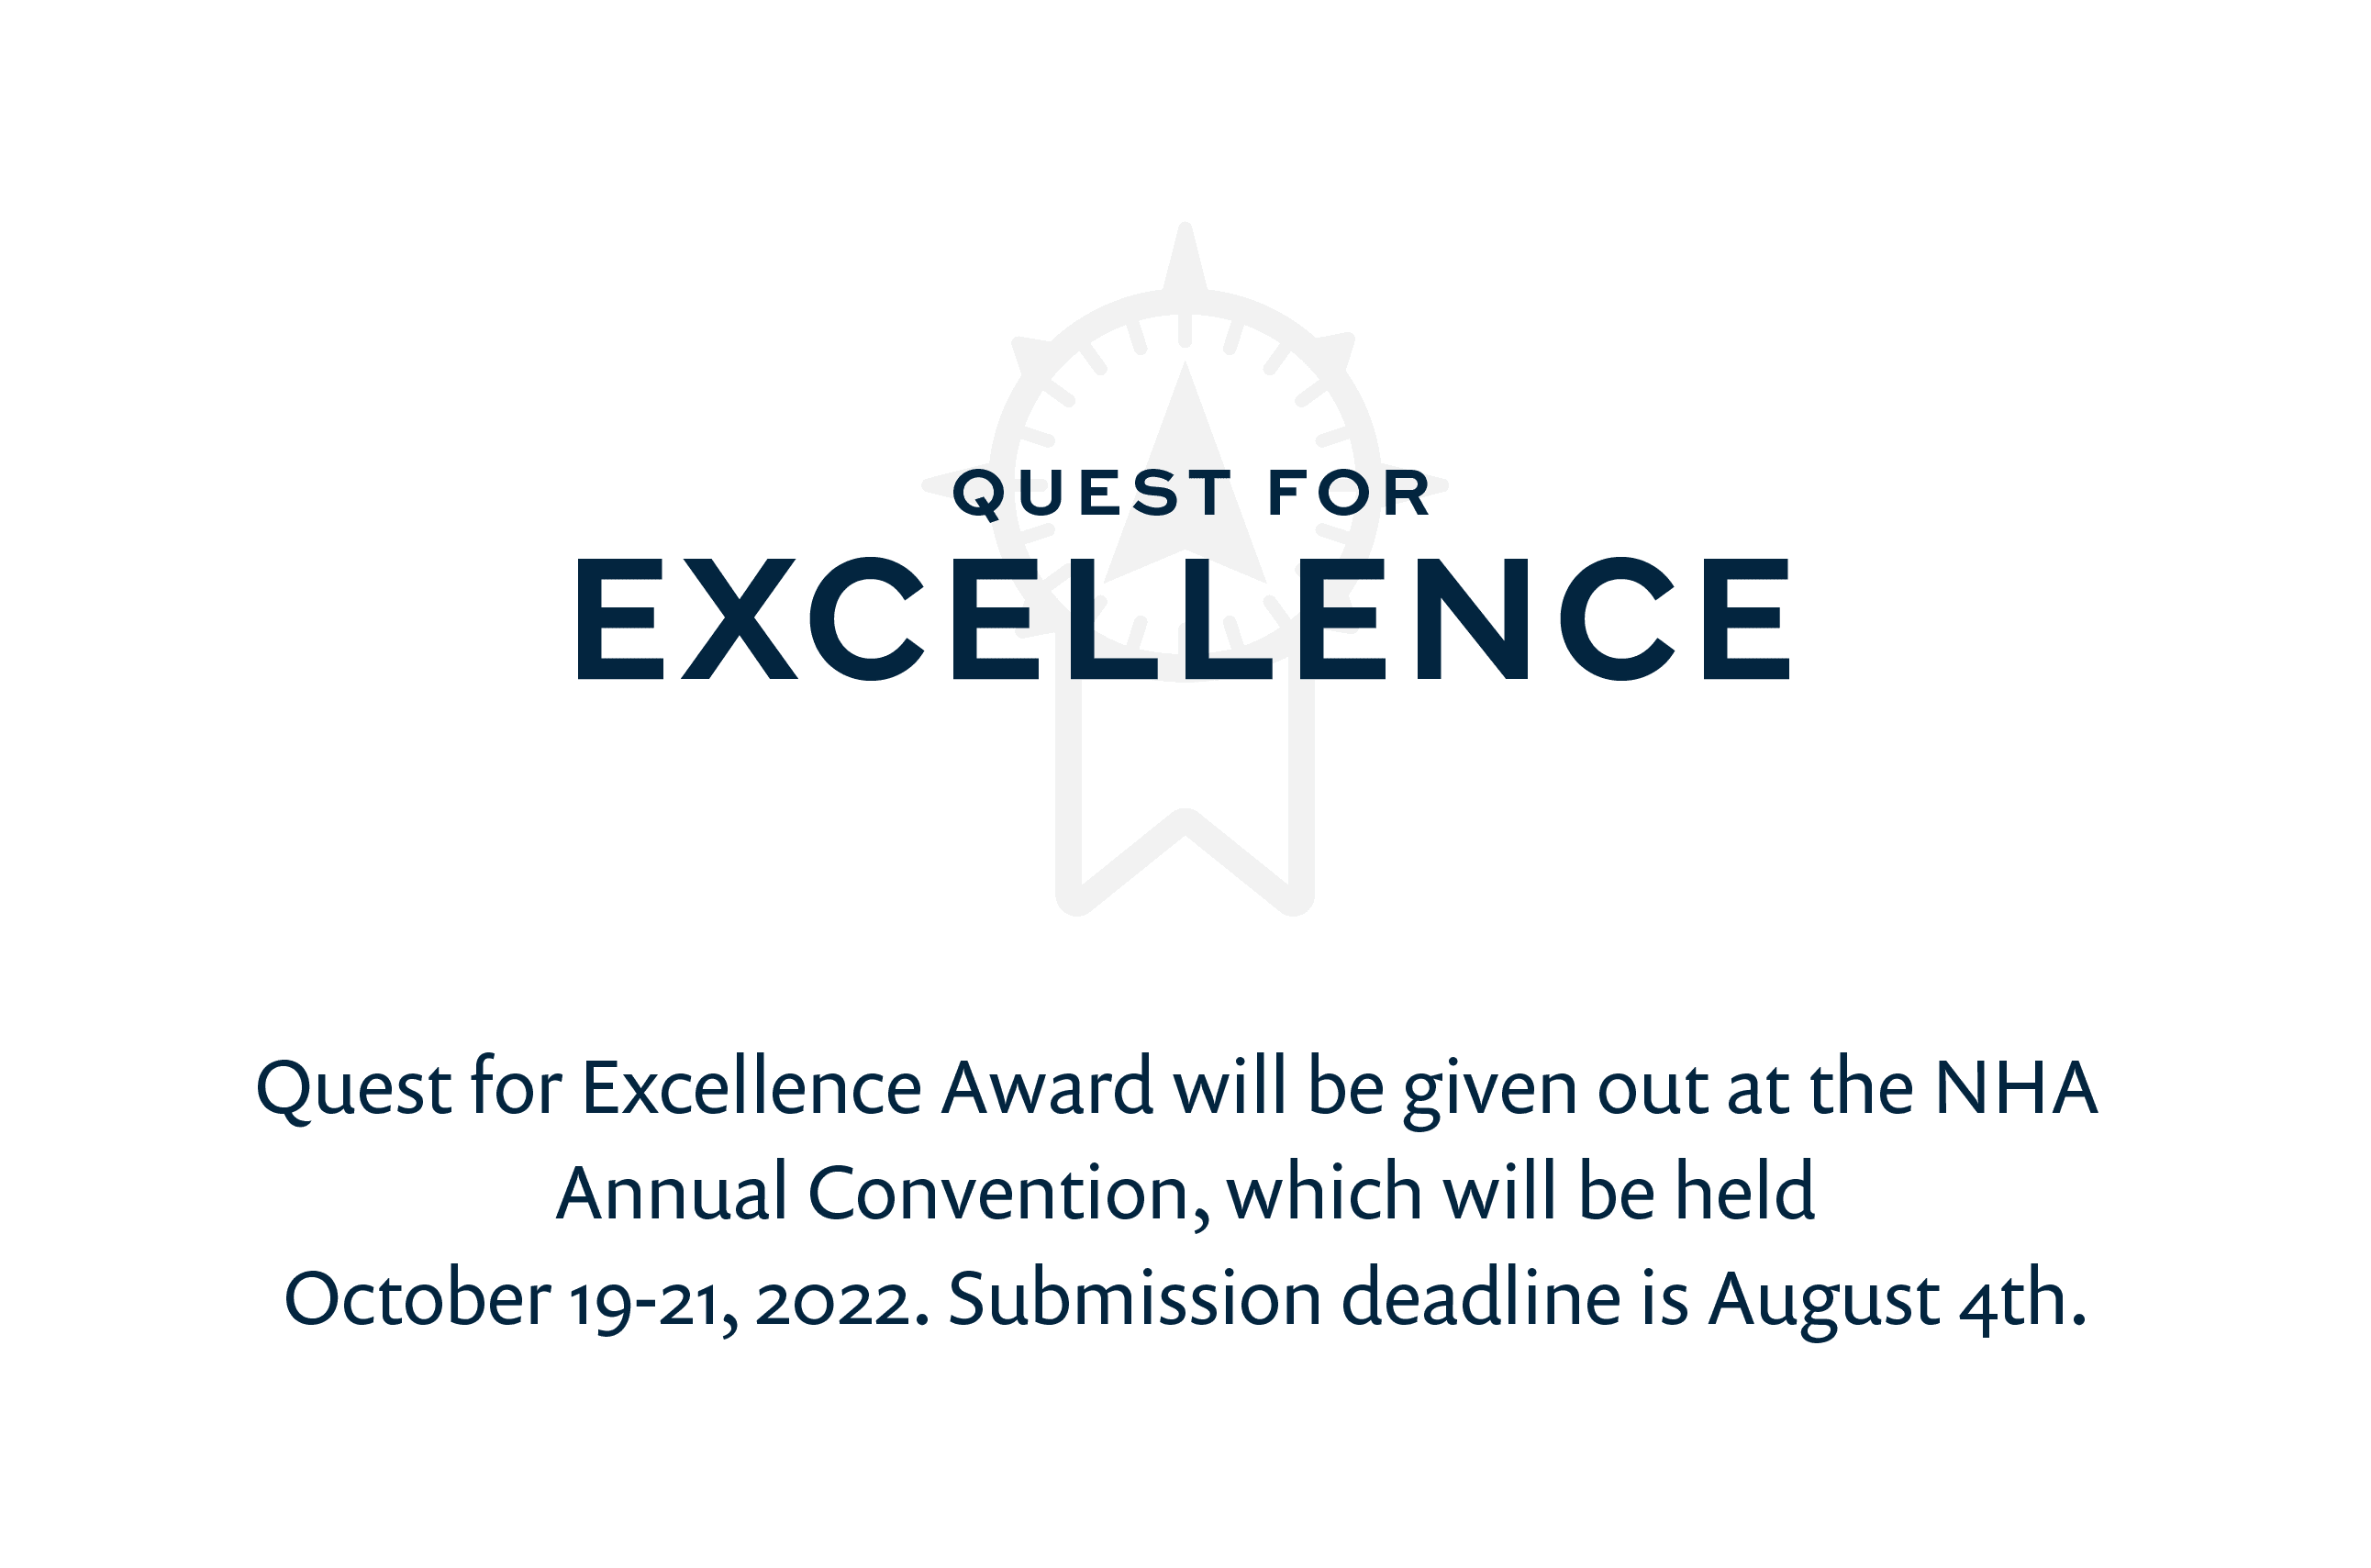 Quest for Excellence Award Call for Nominations